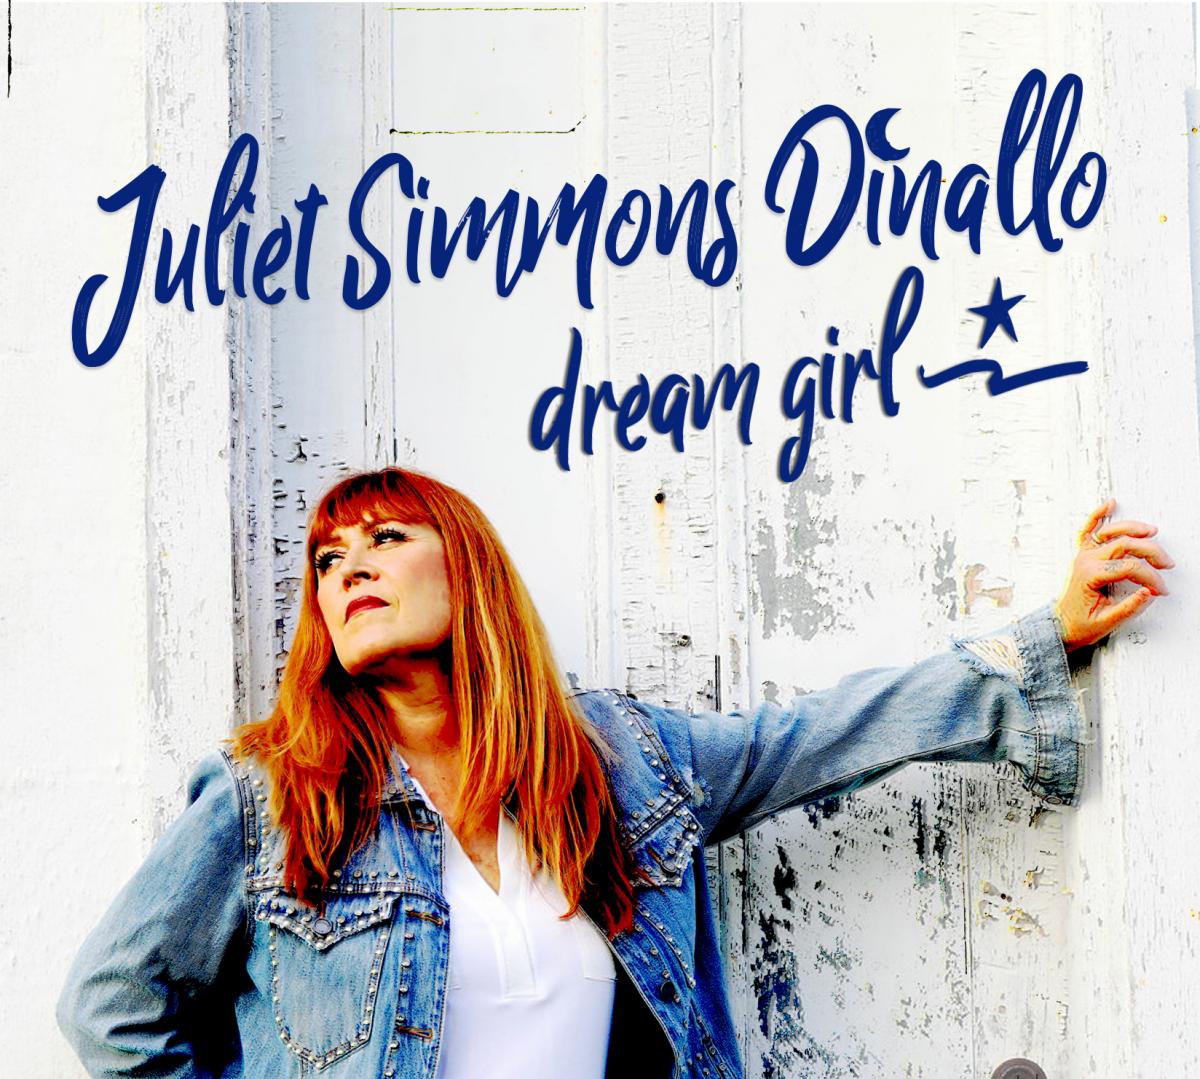 Country/Roots Singer Juliet Simmons Dinallo, Dream Girl, on November 16